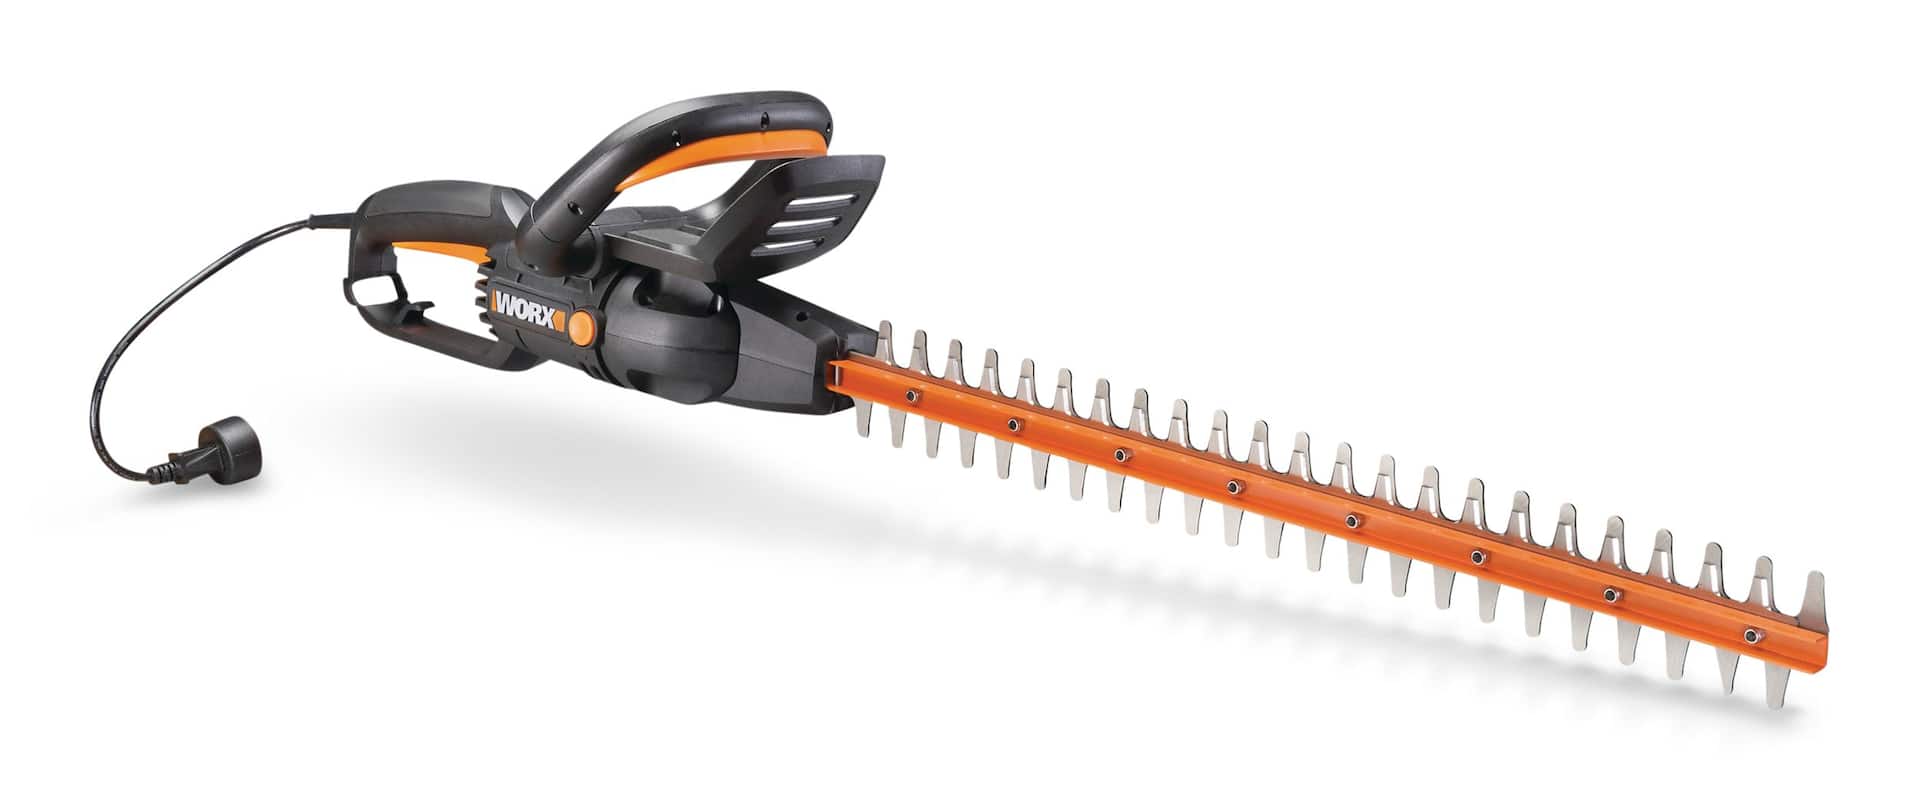 https://media-www.canadiantire.ca/product/seasonal-gardening/outdoor-tools/hand-held-outdoor-power-tools/0602338/worx-4-5a-electric-hedge-trimmer-48240687-662e-42e6-8303-ca080fb5c9a0-jpgrendition.jpg